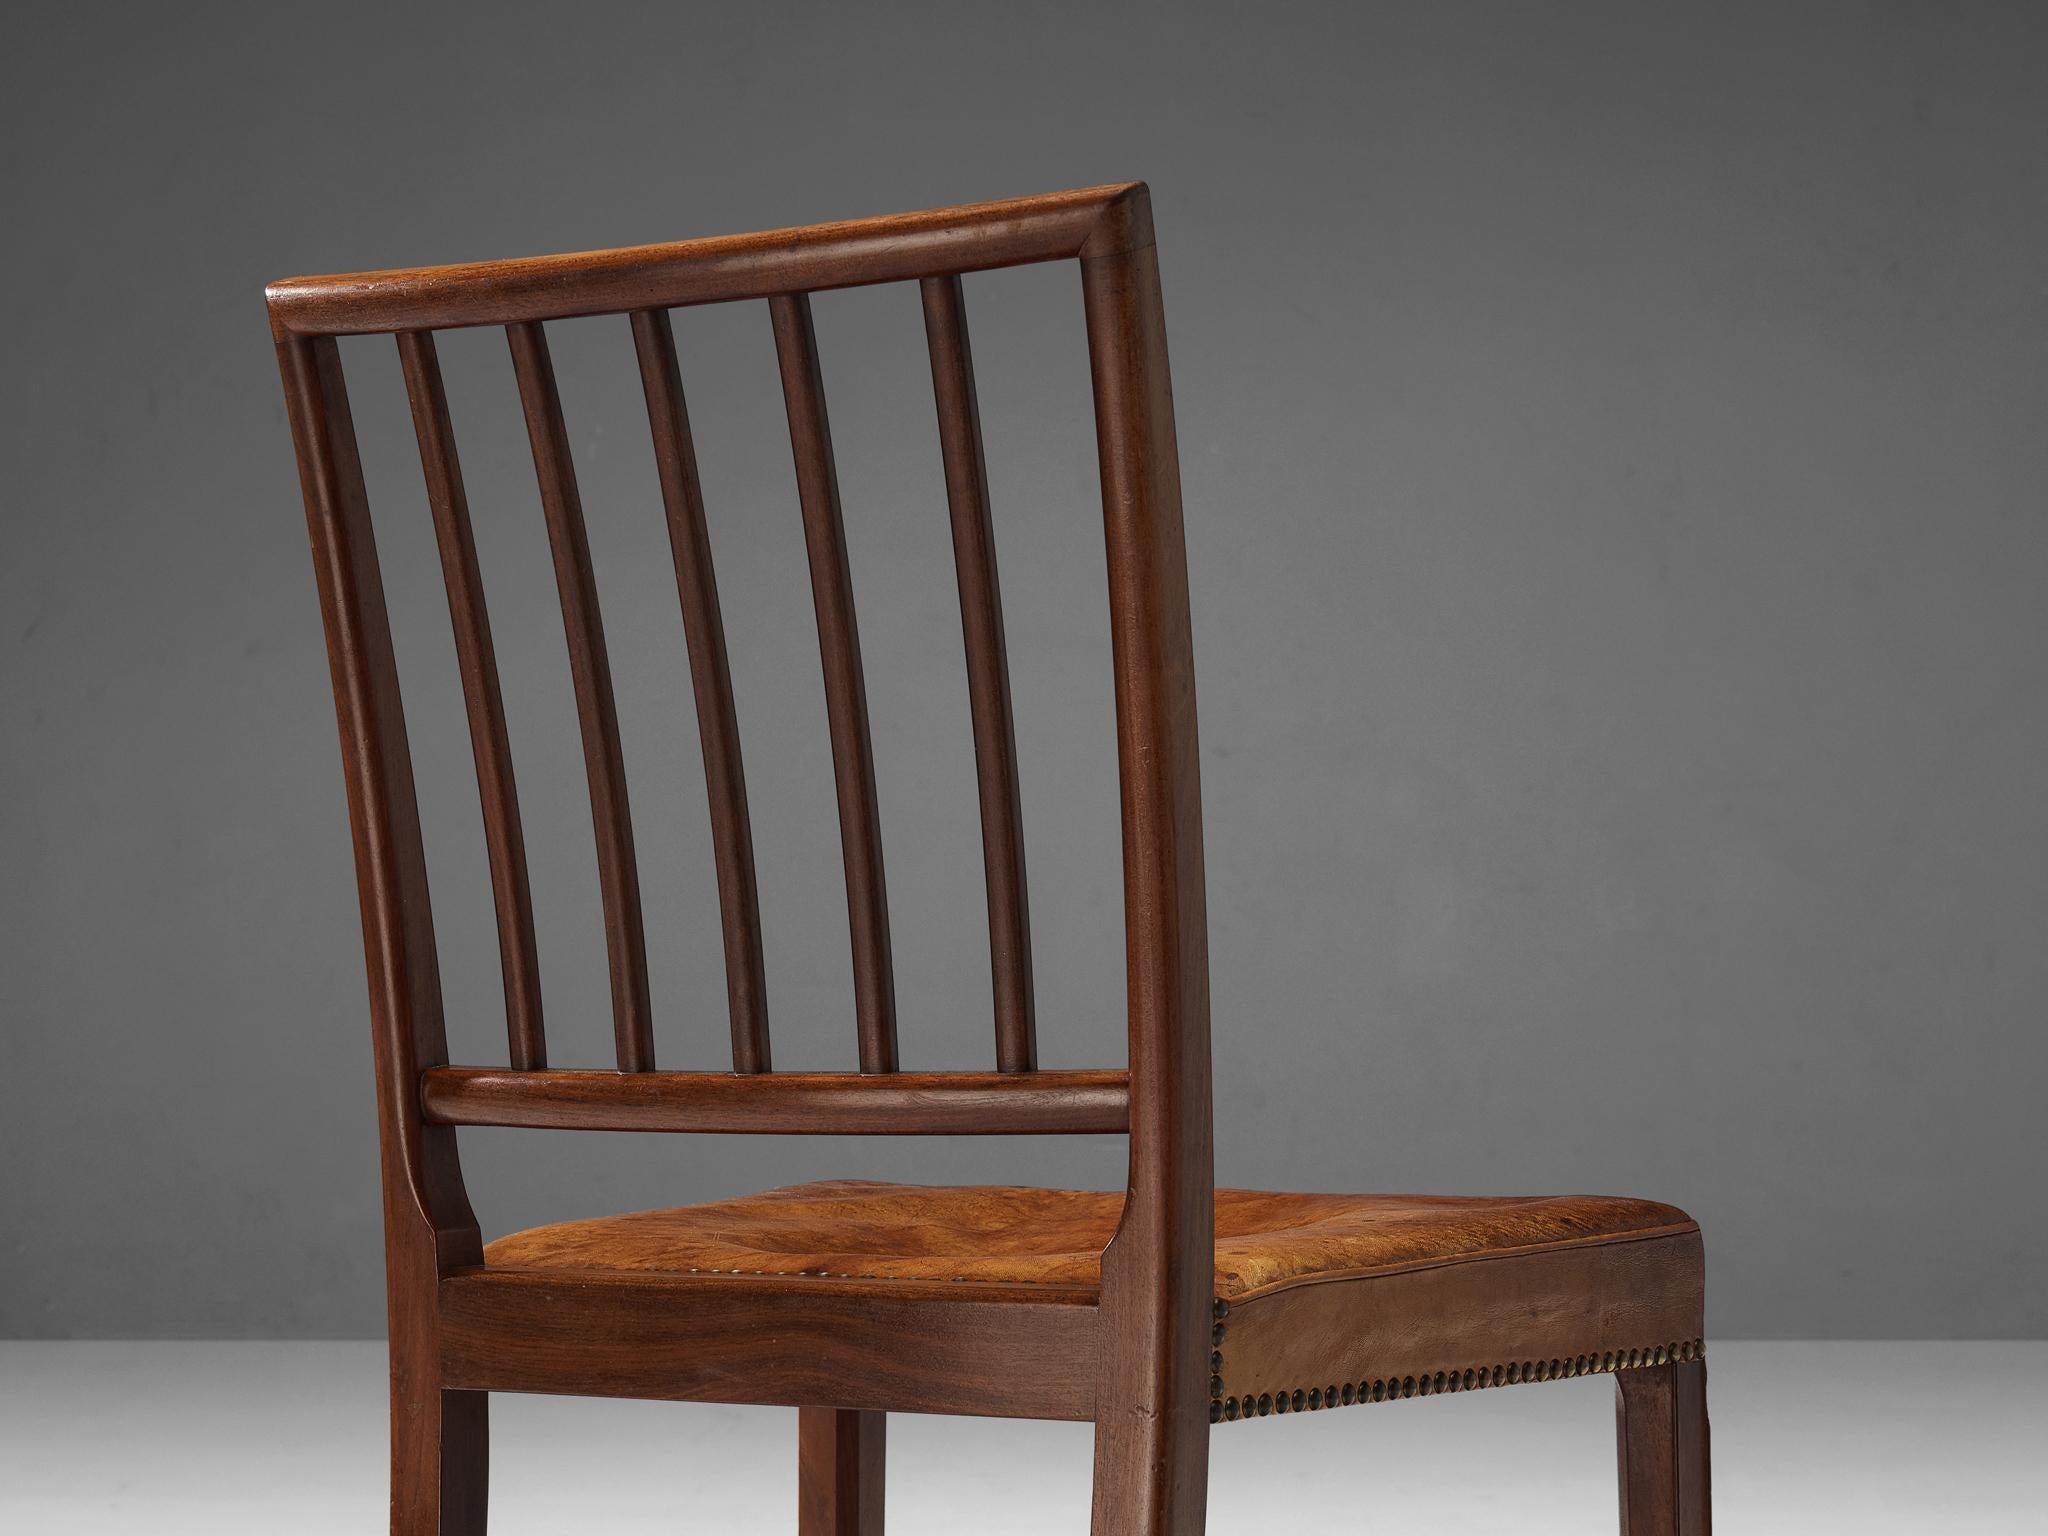 Jacob Kjaer Rare Set of Six Dining Chairs in Mahogany and Niger Leather